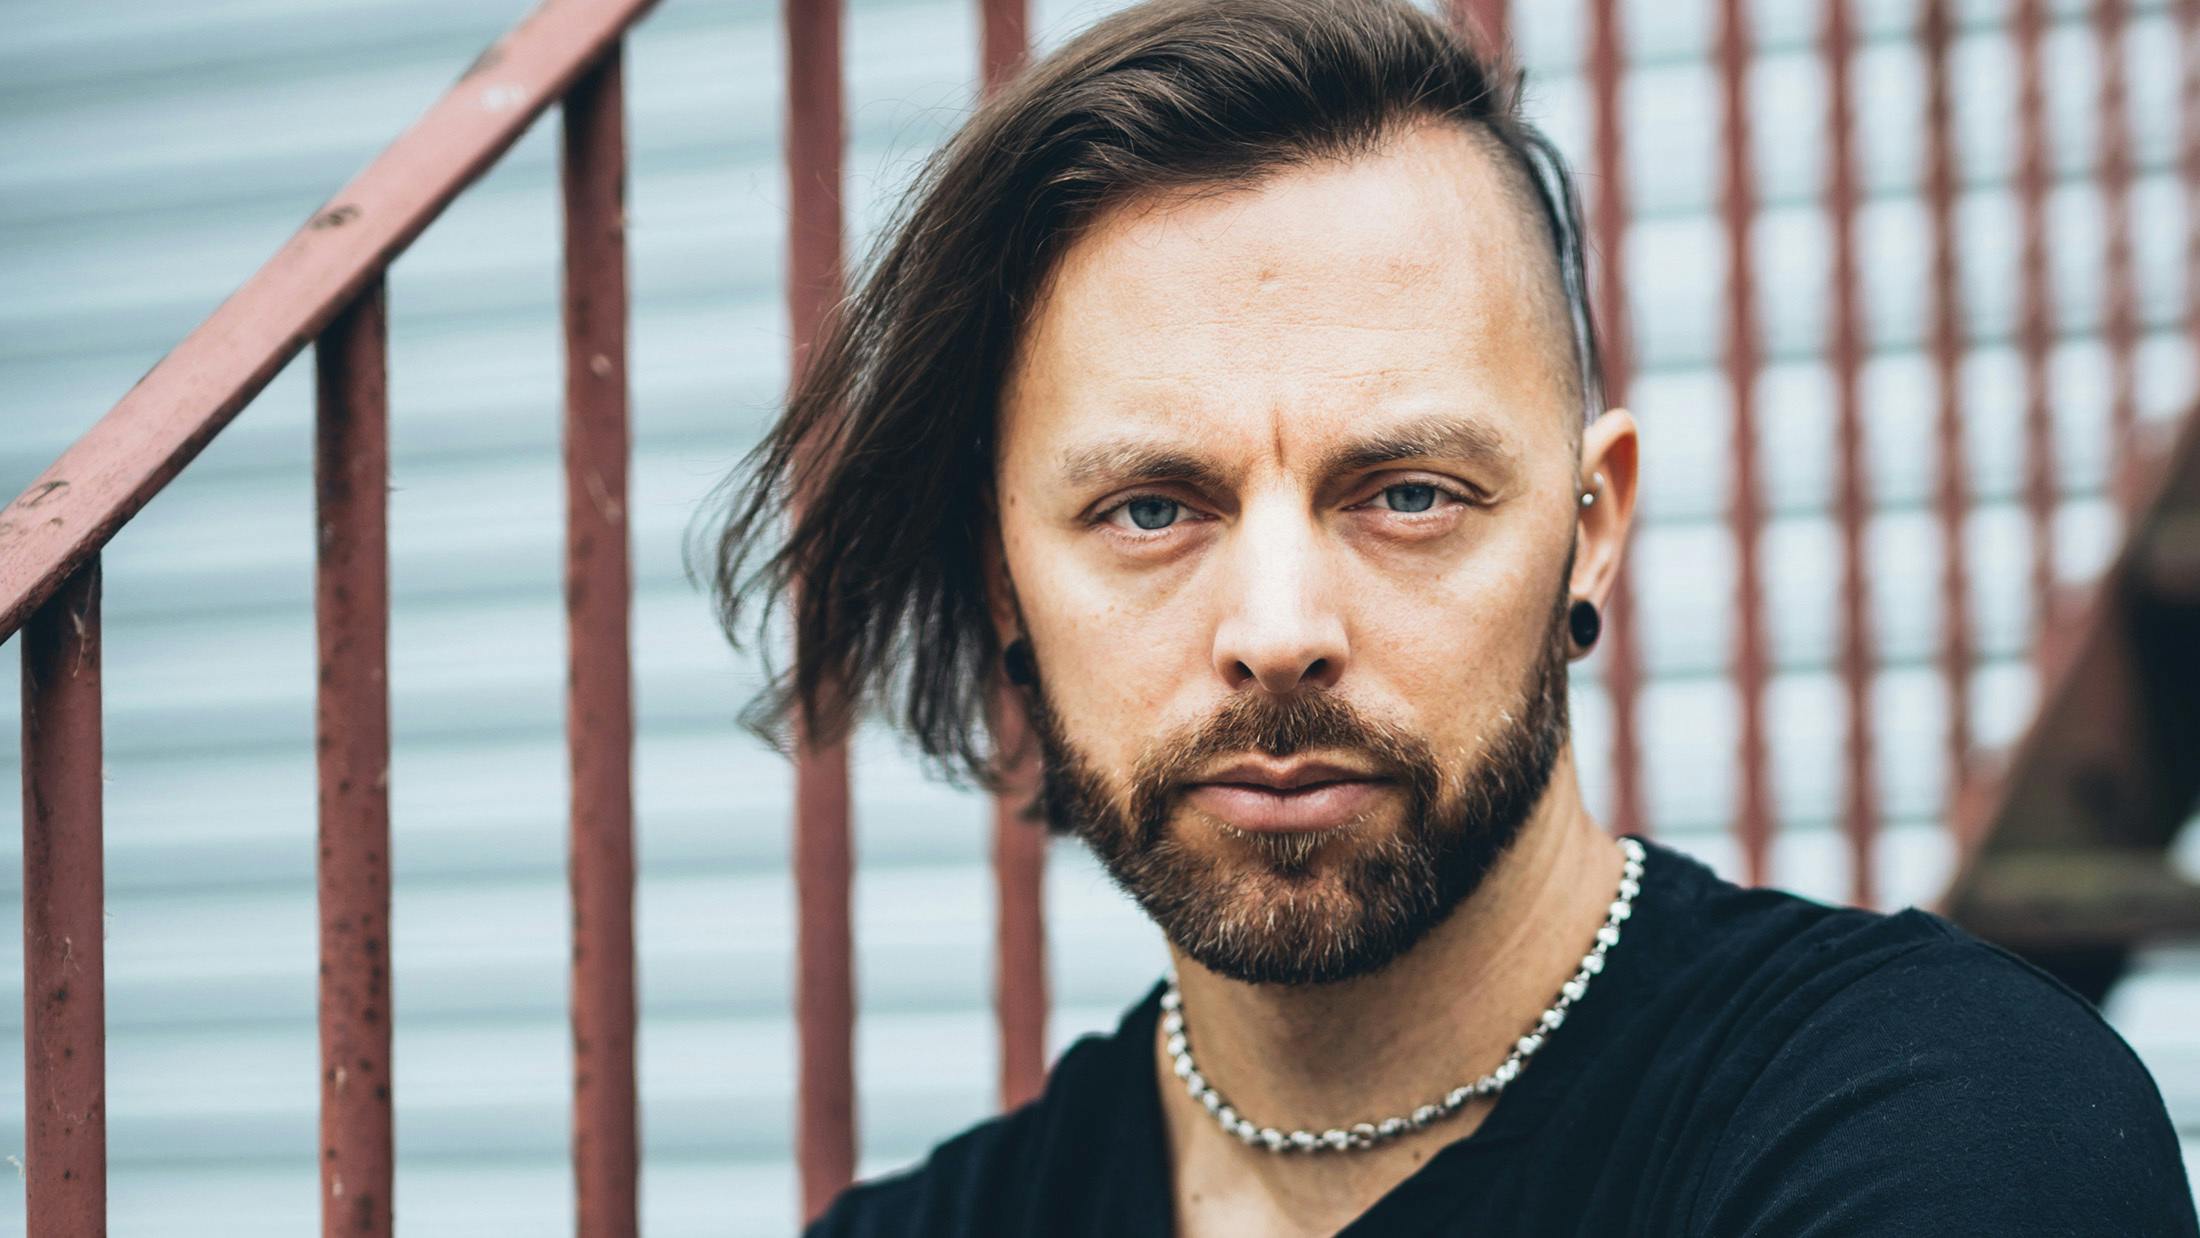 BFMV's Matt Tuck: "This Was Never Given To Us. We Worked Our Arses Off"